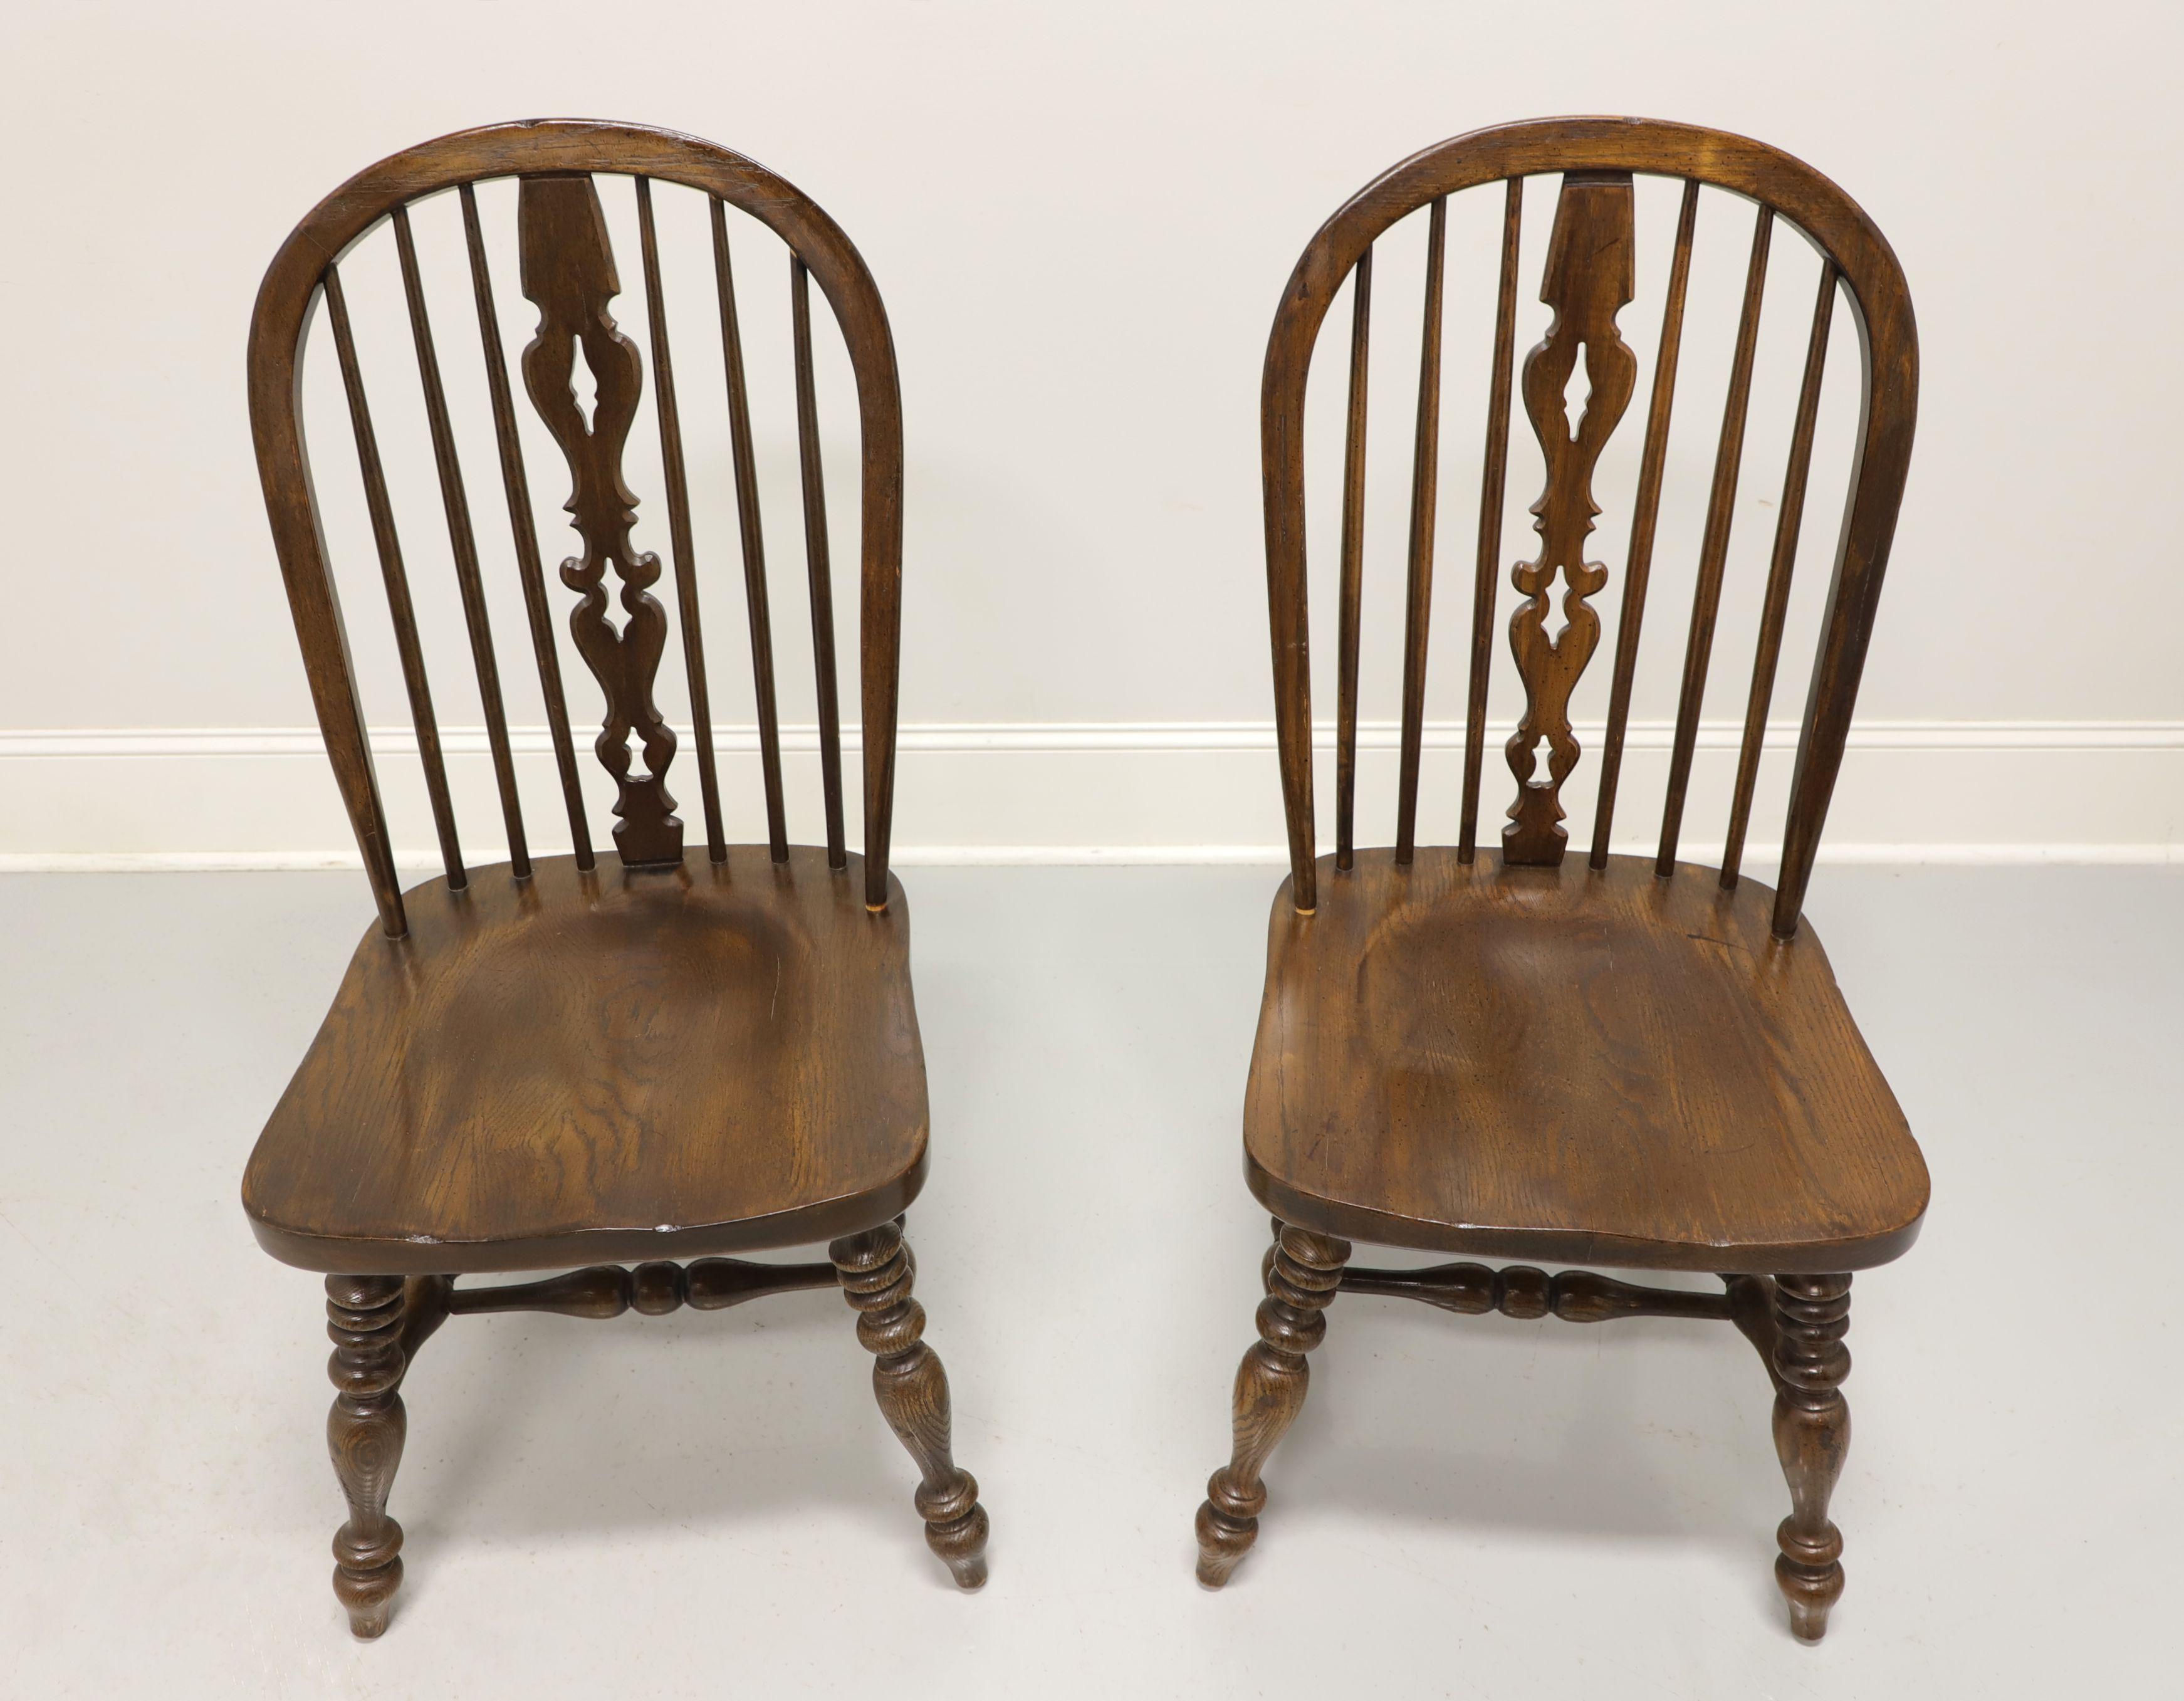 A pair of Windsor style dining side chairs by Ethan Allen, from their Royal Charter collection. Solid oak with bowback, spindle back with carved center backsplat, turned legs and stretchers. Made in the USA, in the late 20th century. 

Measures: